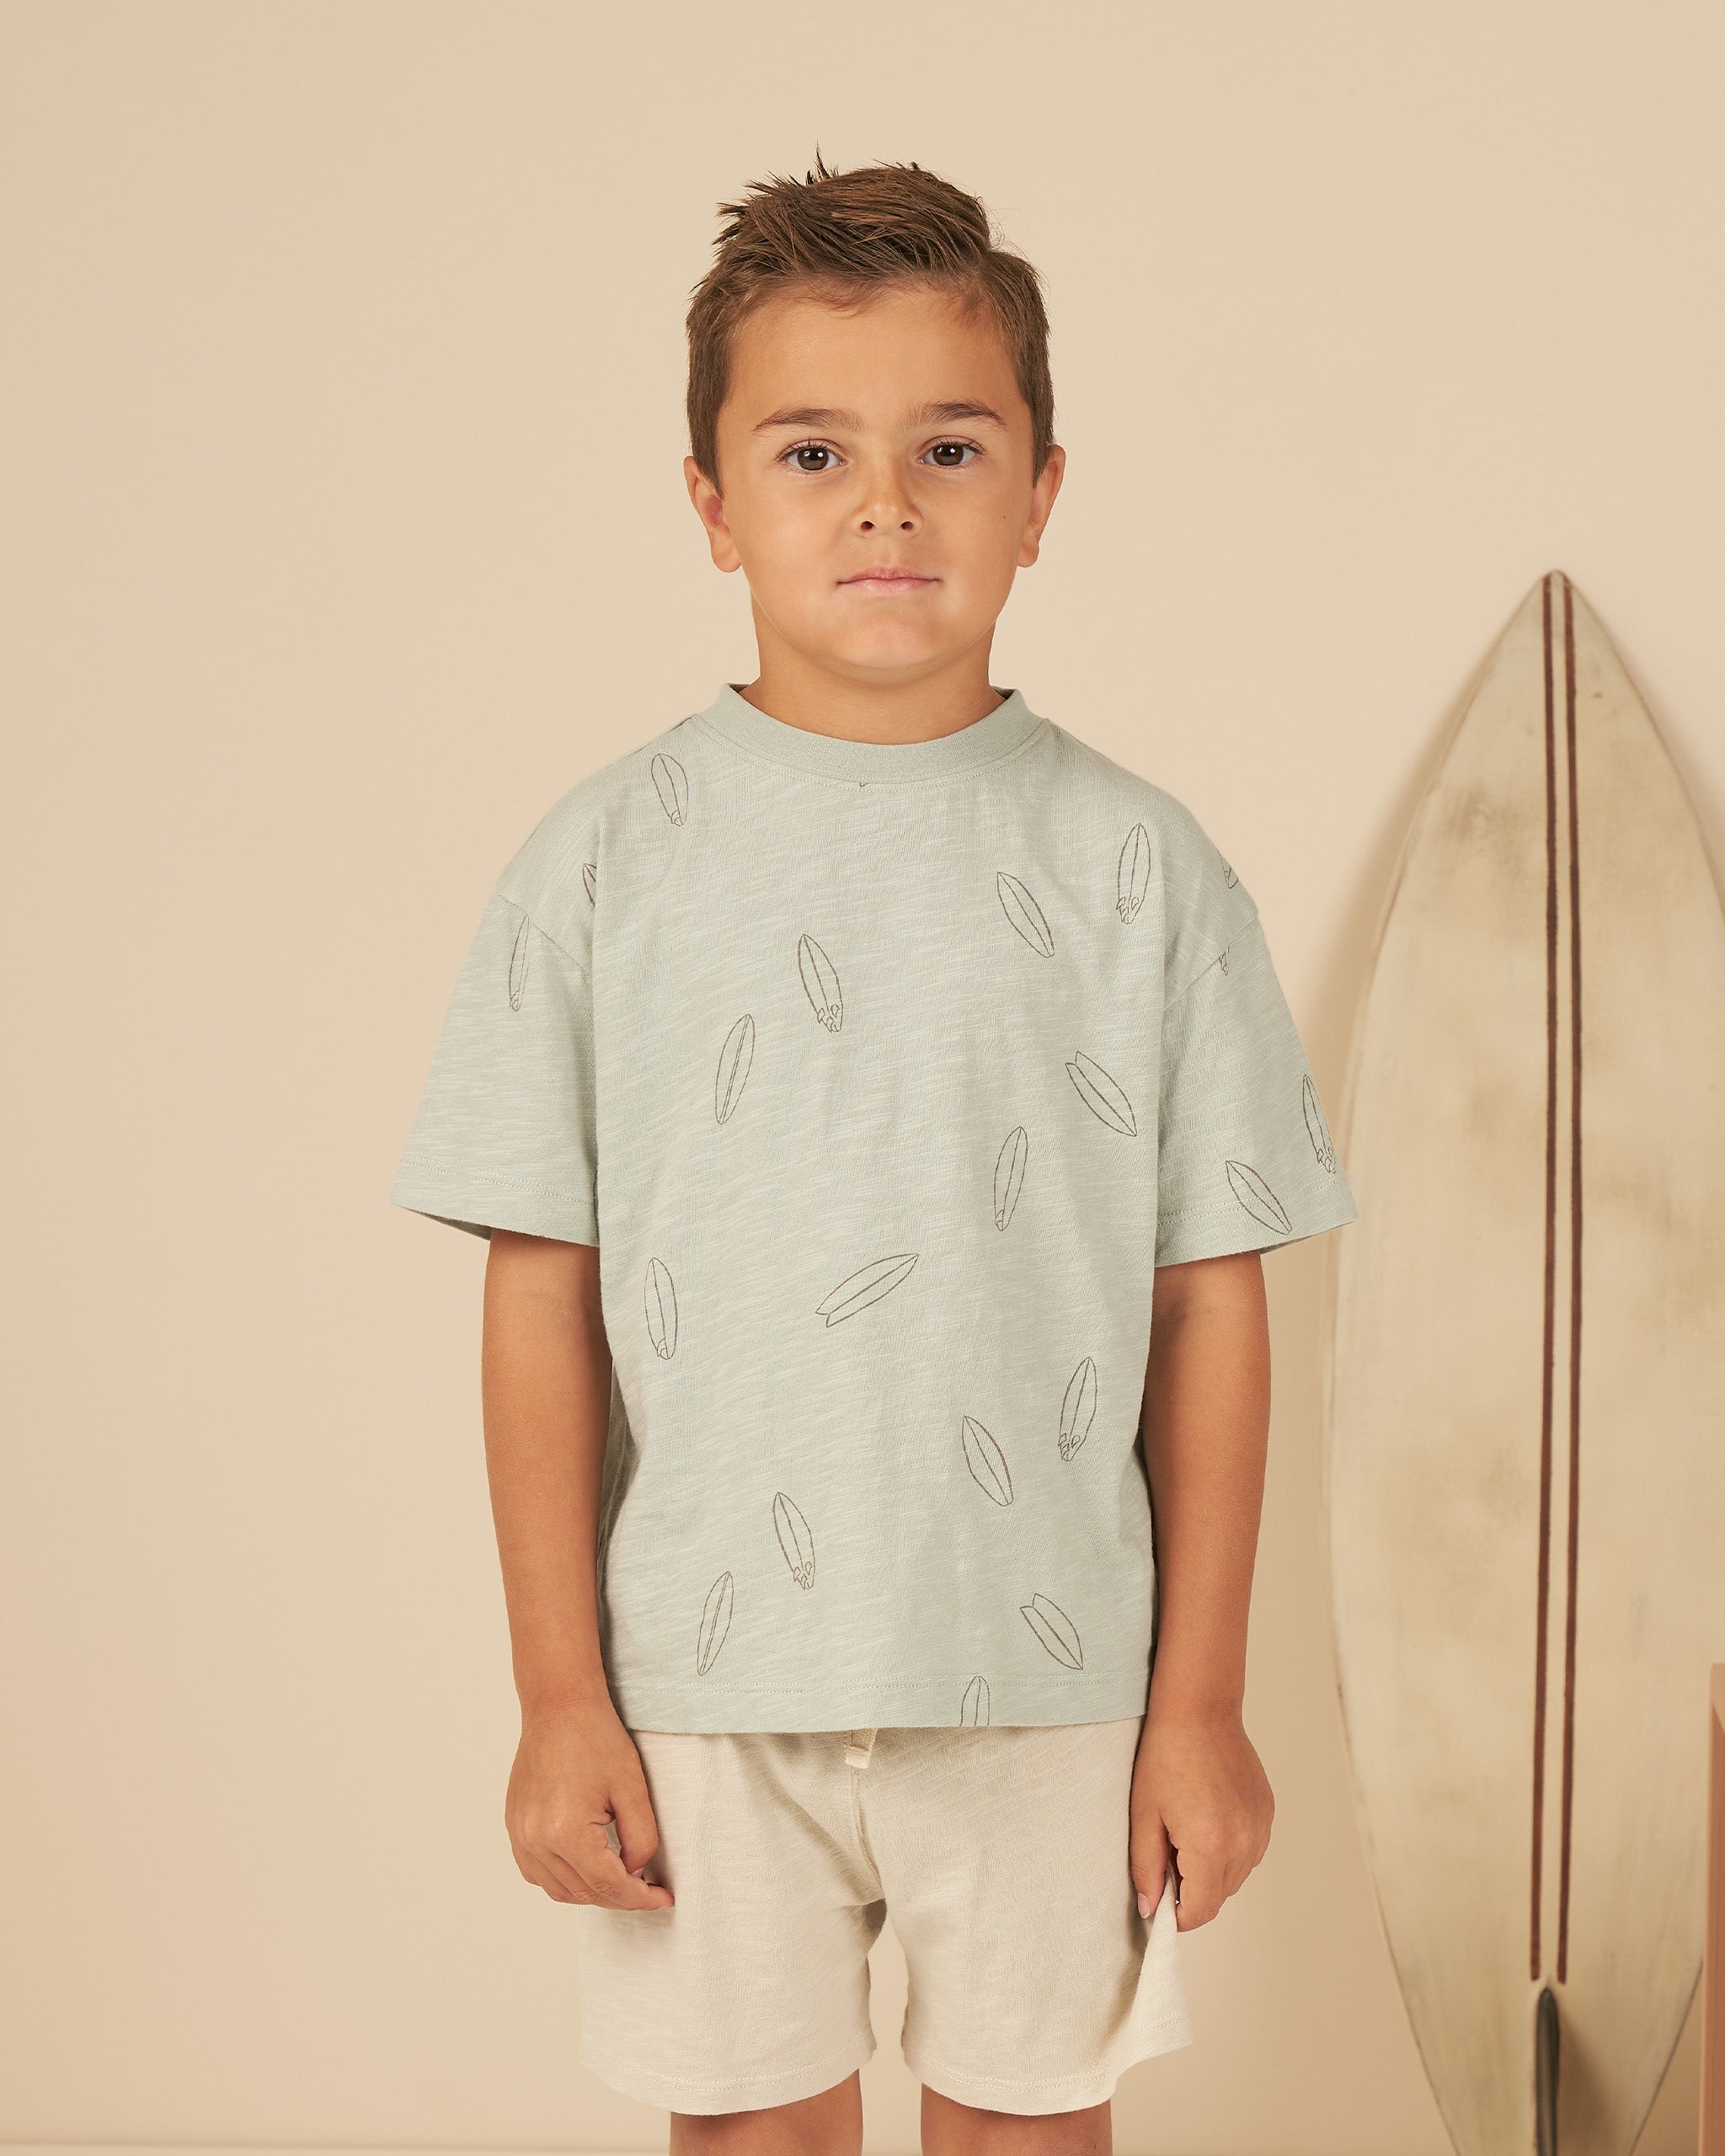 Relaxed Tee || Surfboard - Rylee + Cru | Kids Clothes | Trendy Baby Clothes | Modern Infant Outfits |